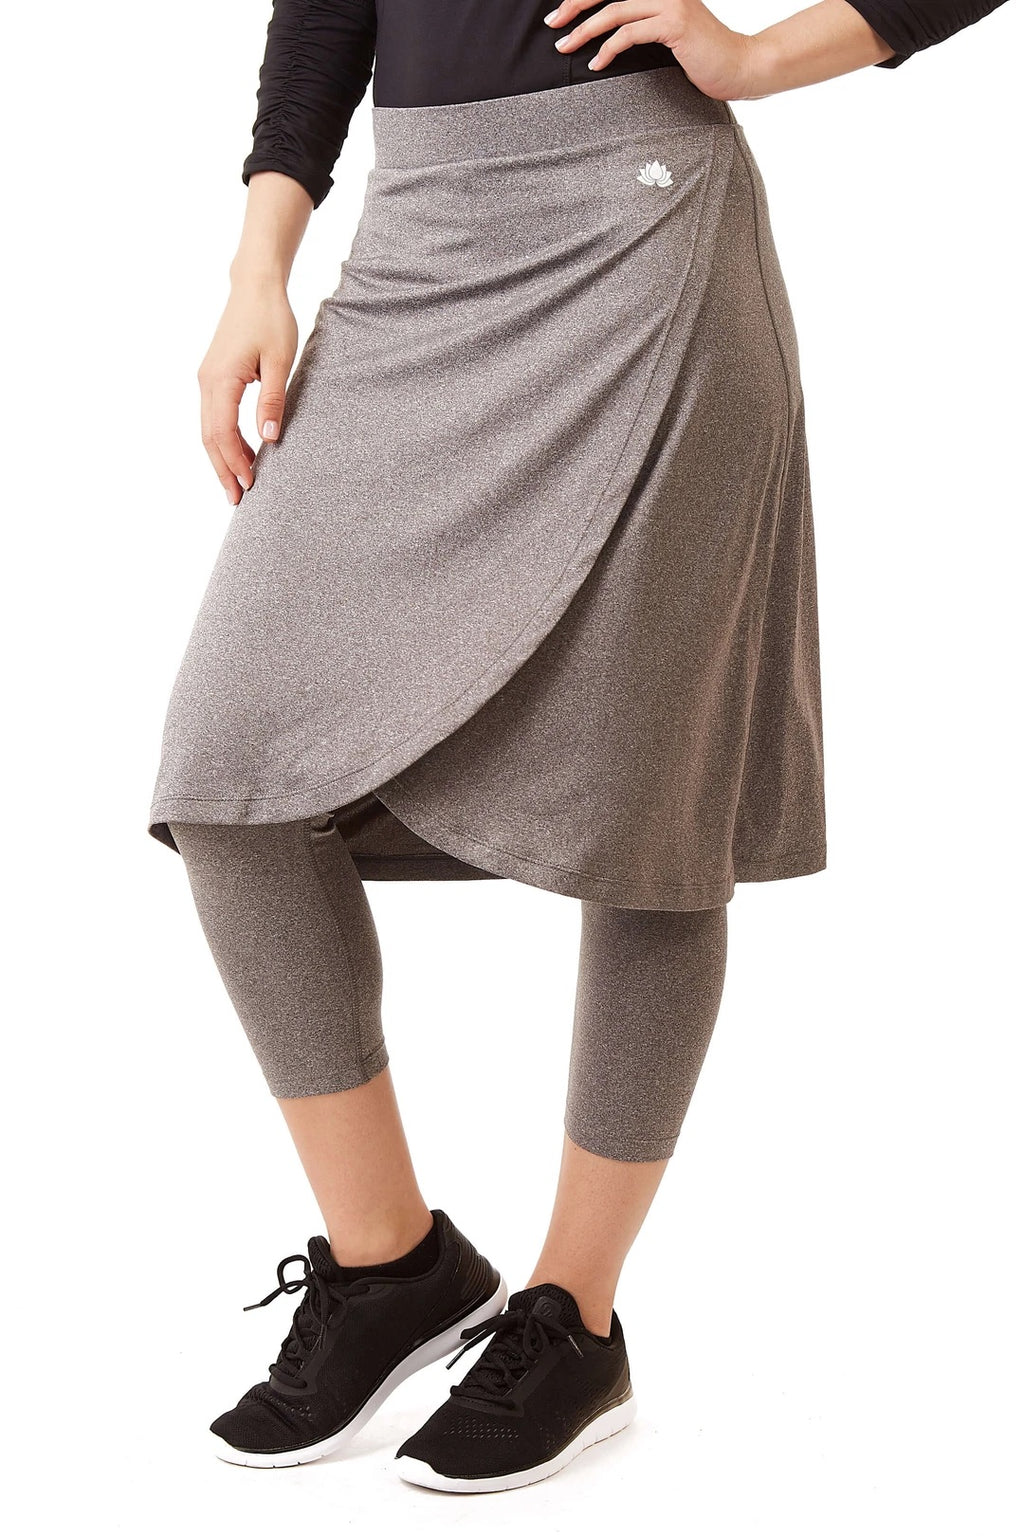 Plus Athletic Skirt with leggings – Be Modest Boutique